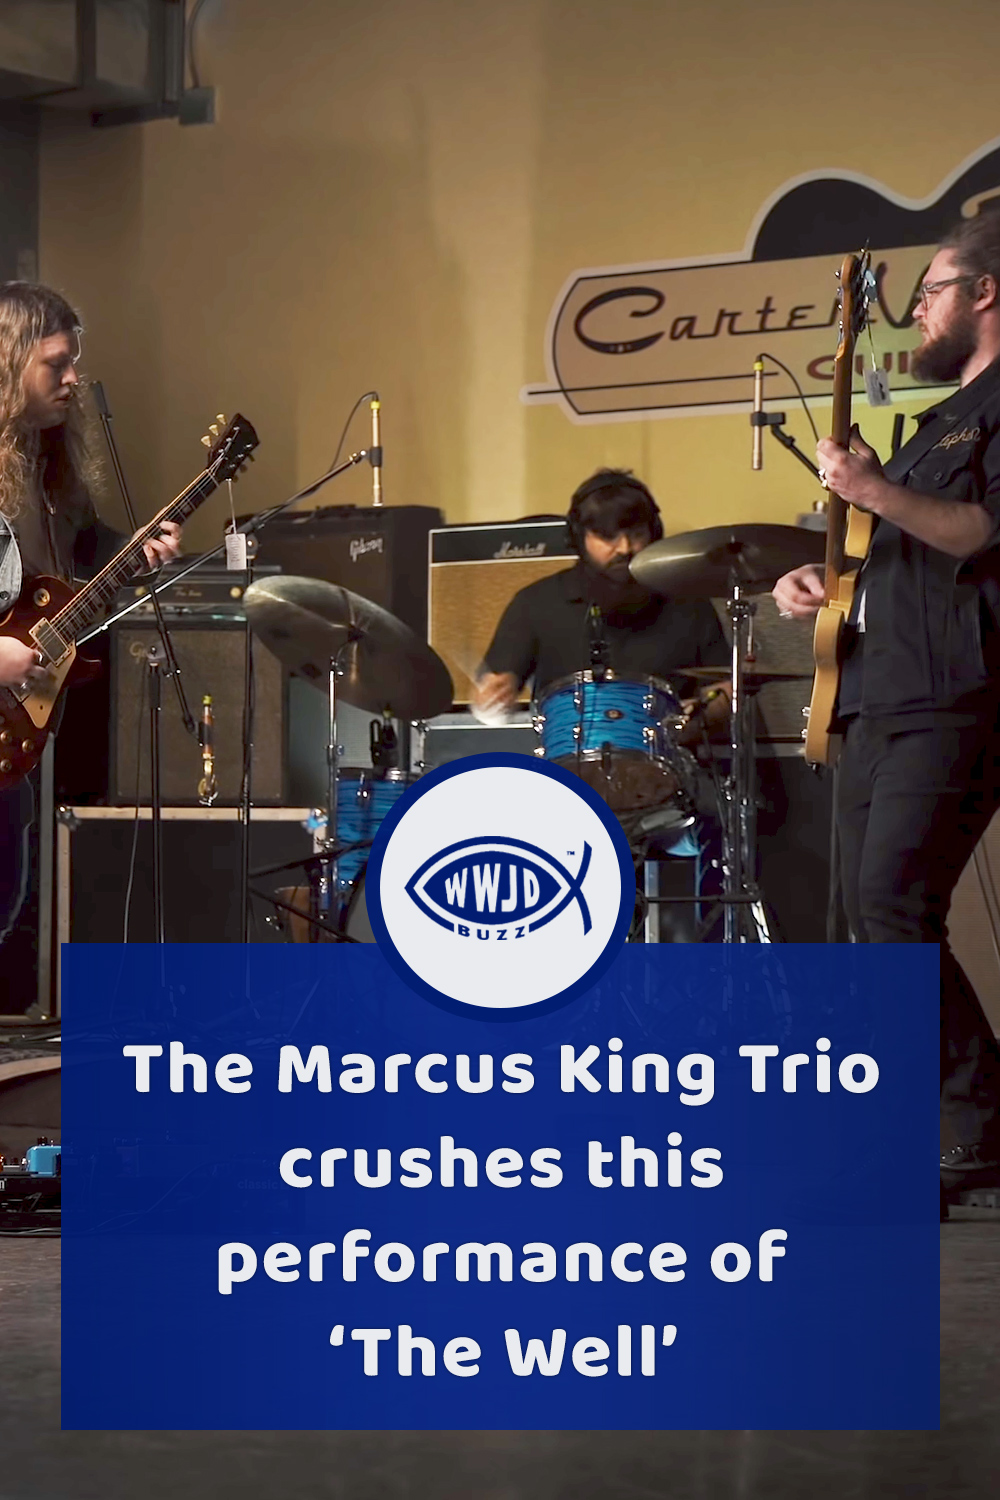 The Marcus King Trio crushes this performance of ‘The Well’